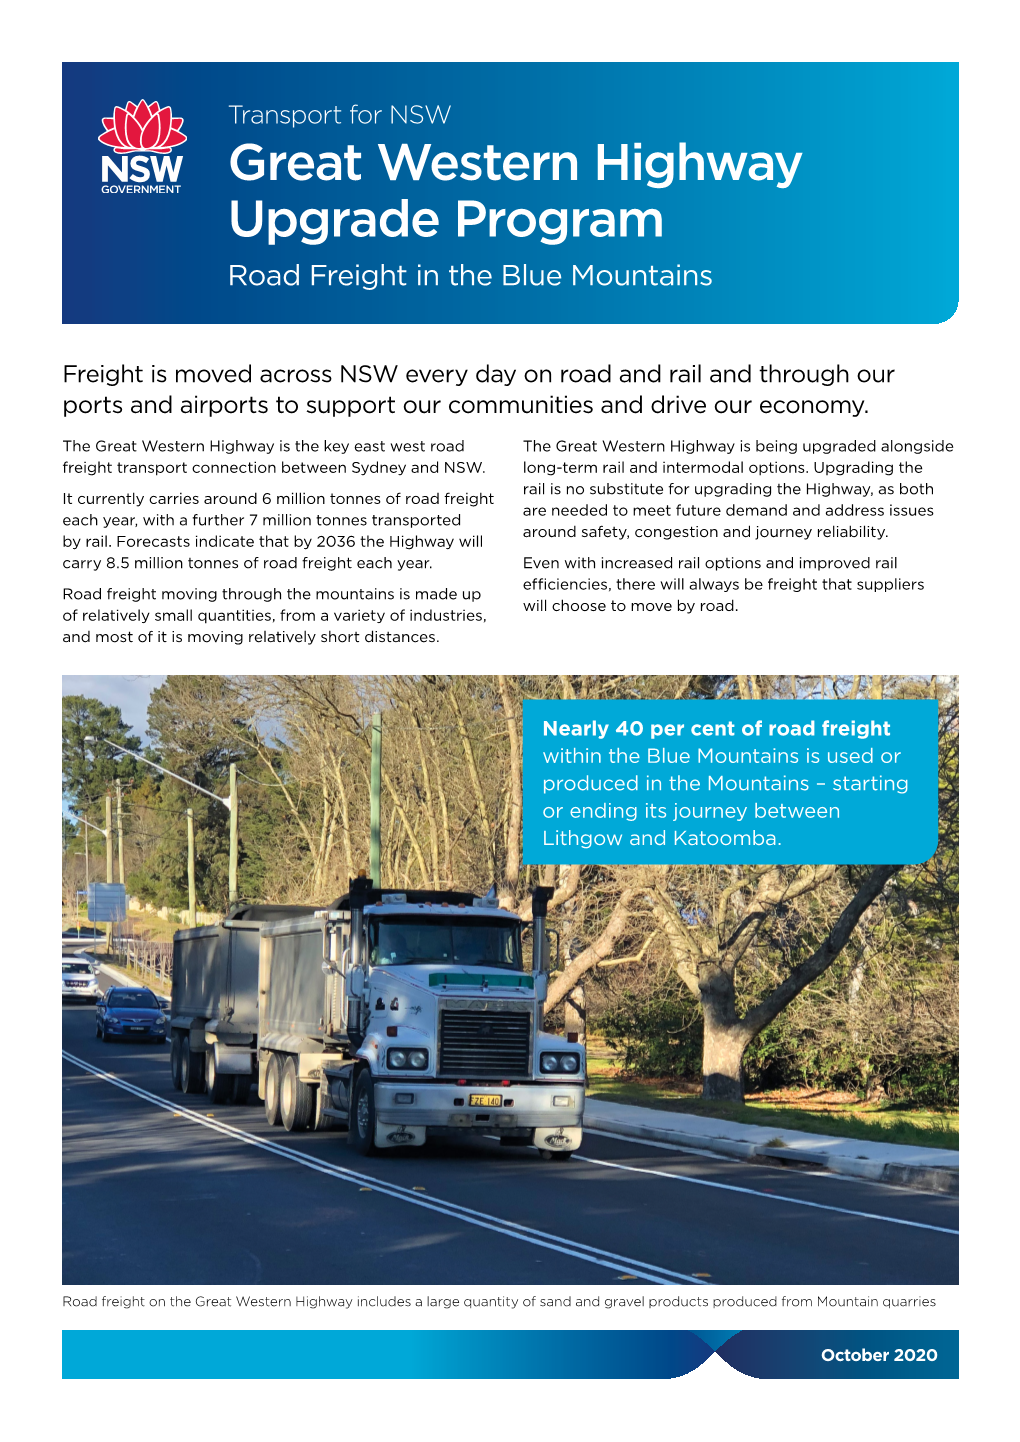 Great Western Highway Upgrade Program Road Freight in the Blue Mountains